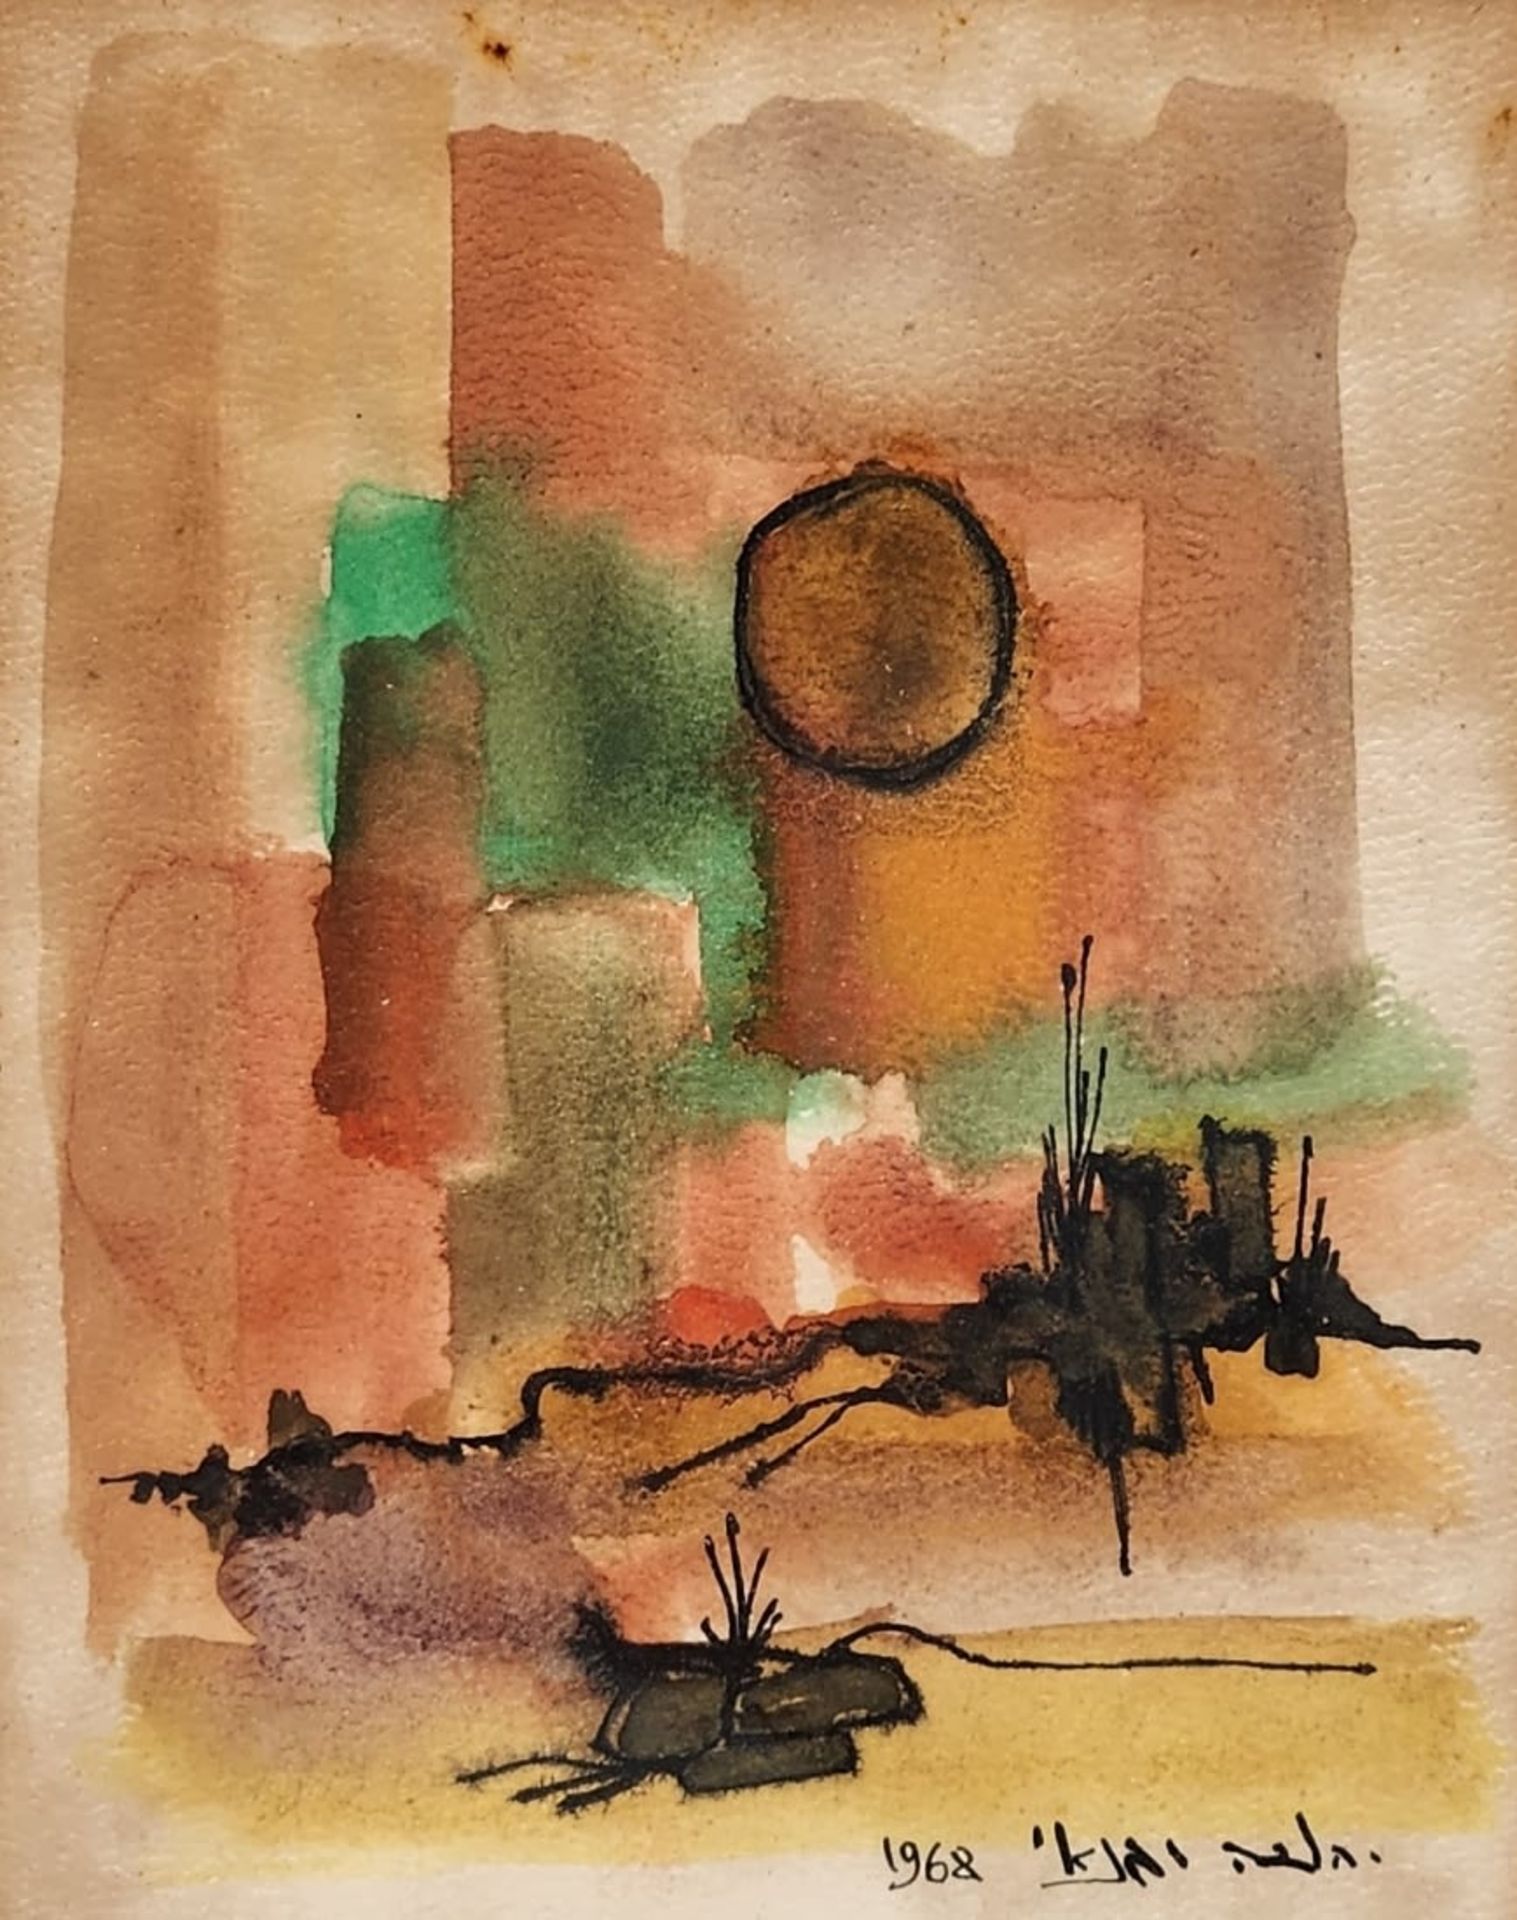 'Dusk' -' Yehuda Yavnai, watercolor on paper, signed and dated 1968, including a dedication on the